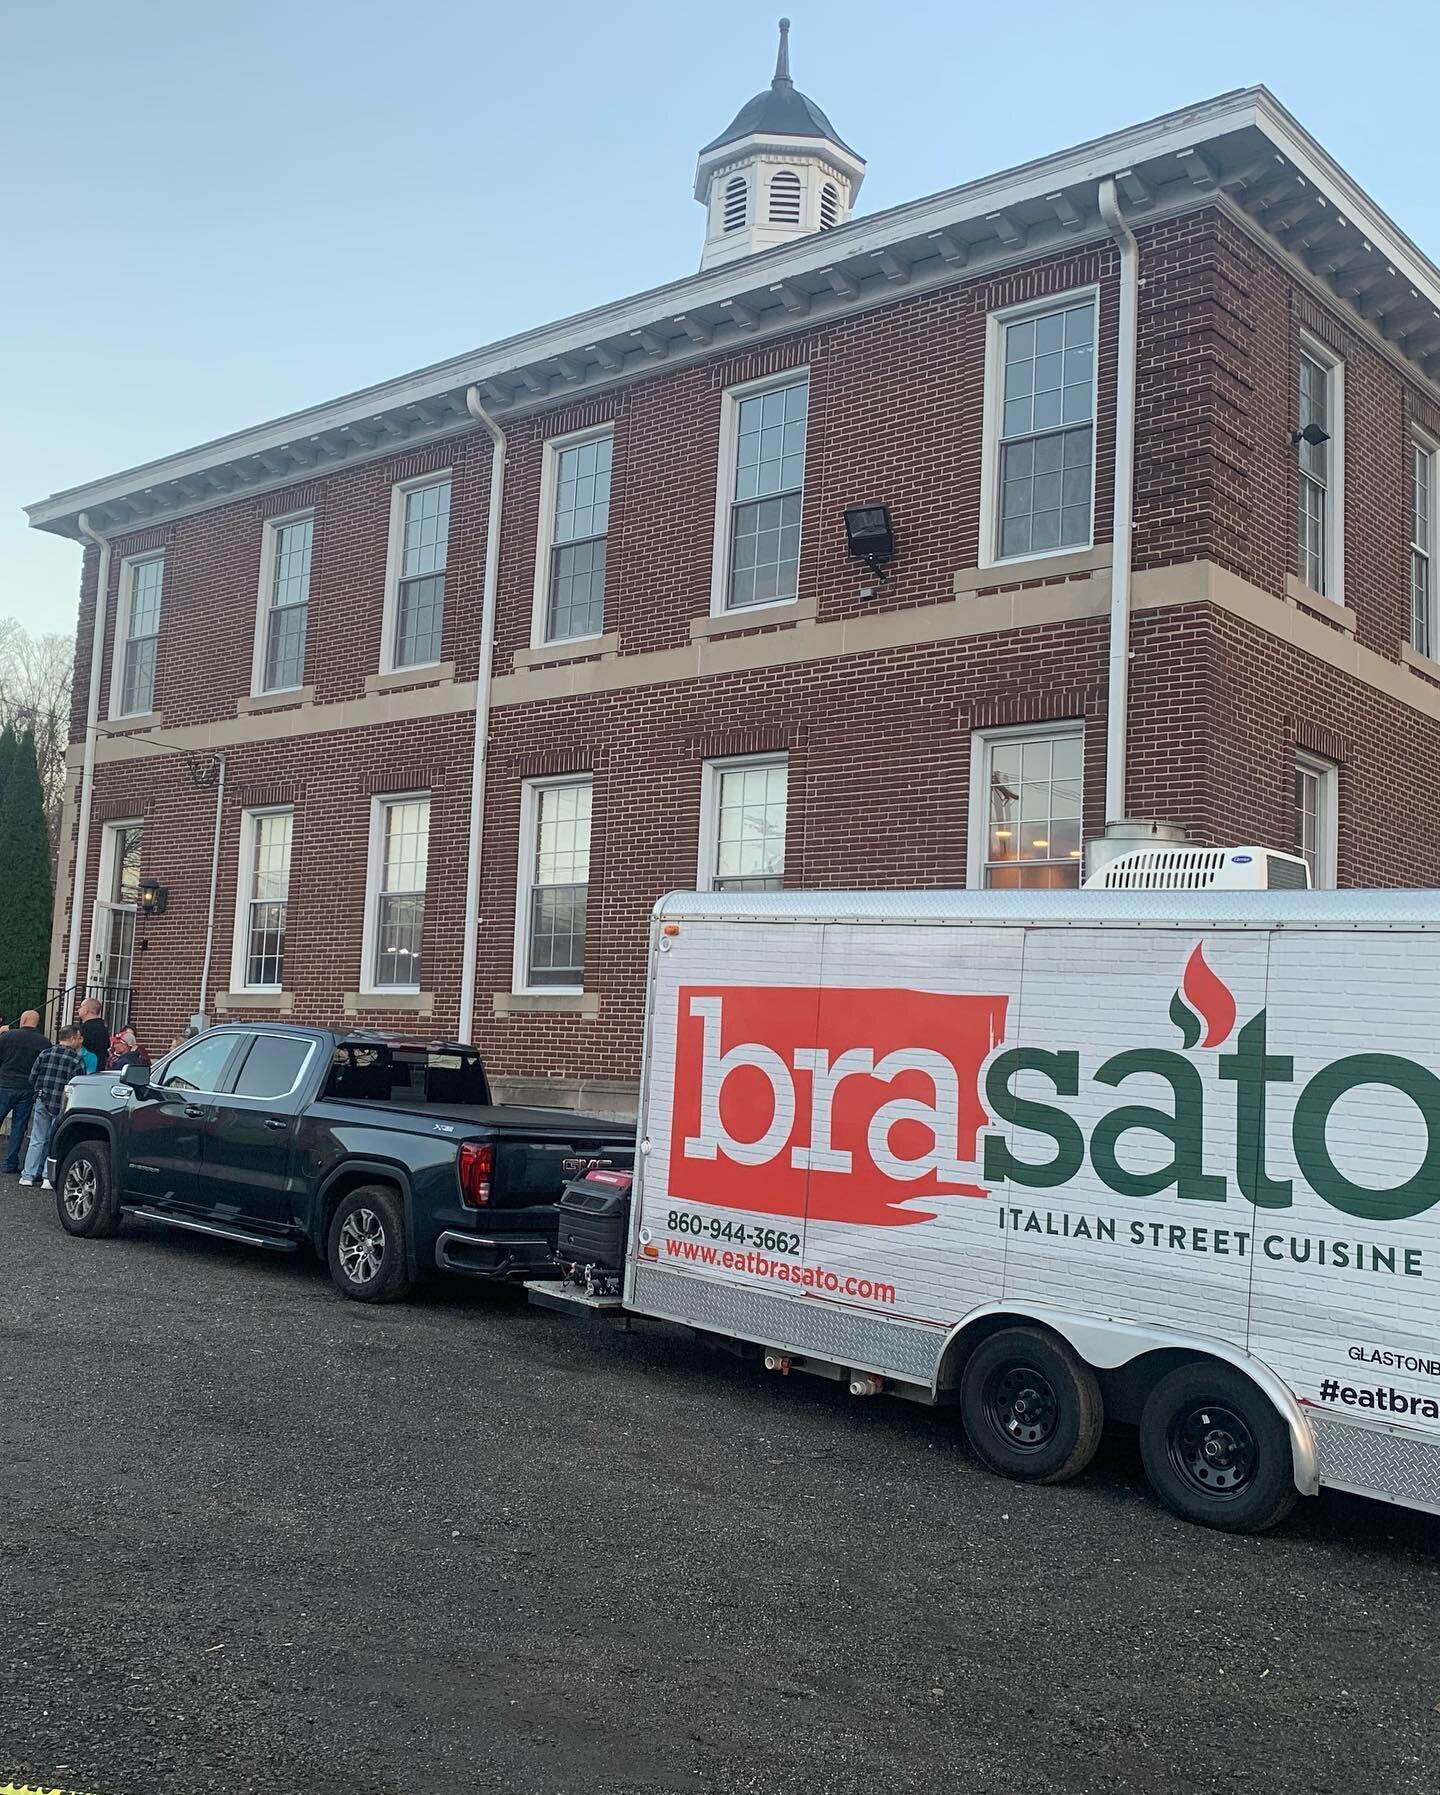 We had a blast serving our delicious food to the men and women at the Waterbury fire dept! Book your next event with us 👇🏻
&bull;http://brasatocatering.com 🇮🇹
#eatbrasato #CTcatering #authenticitalianfood